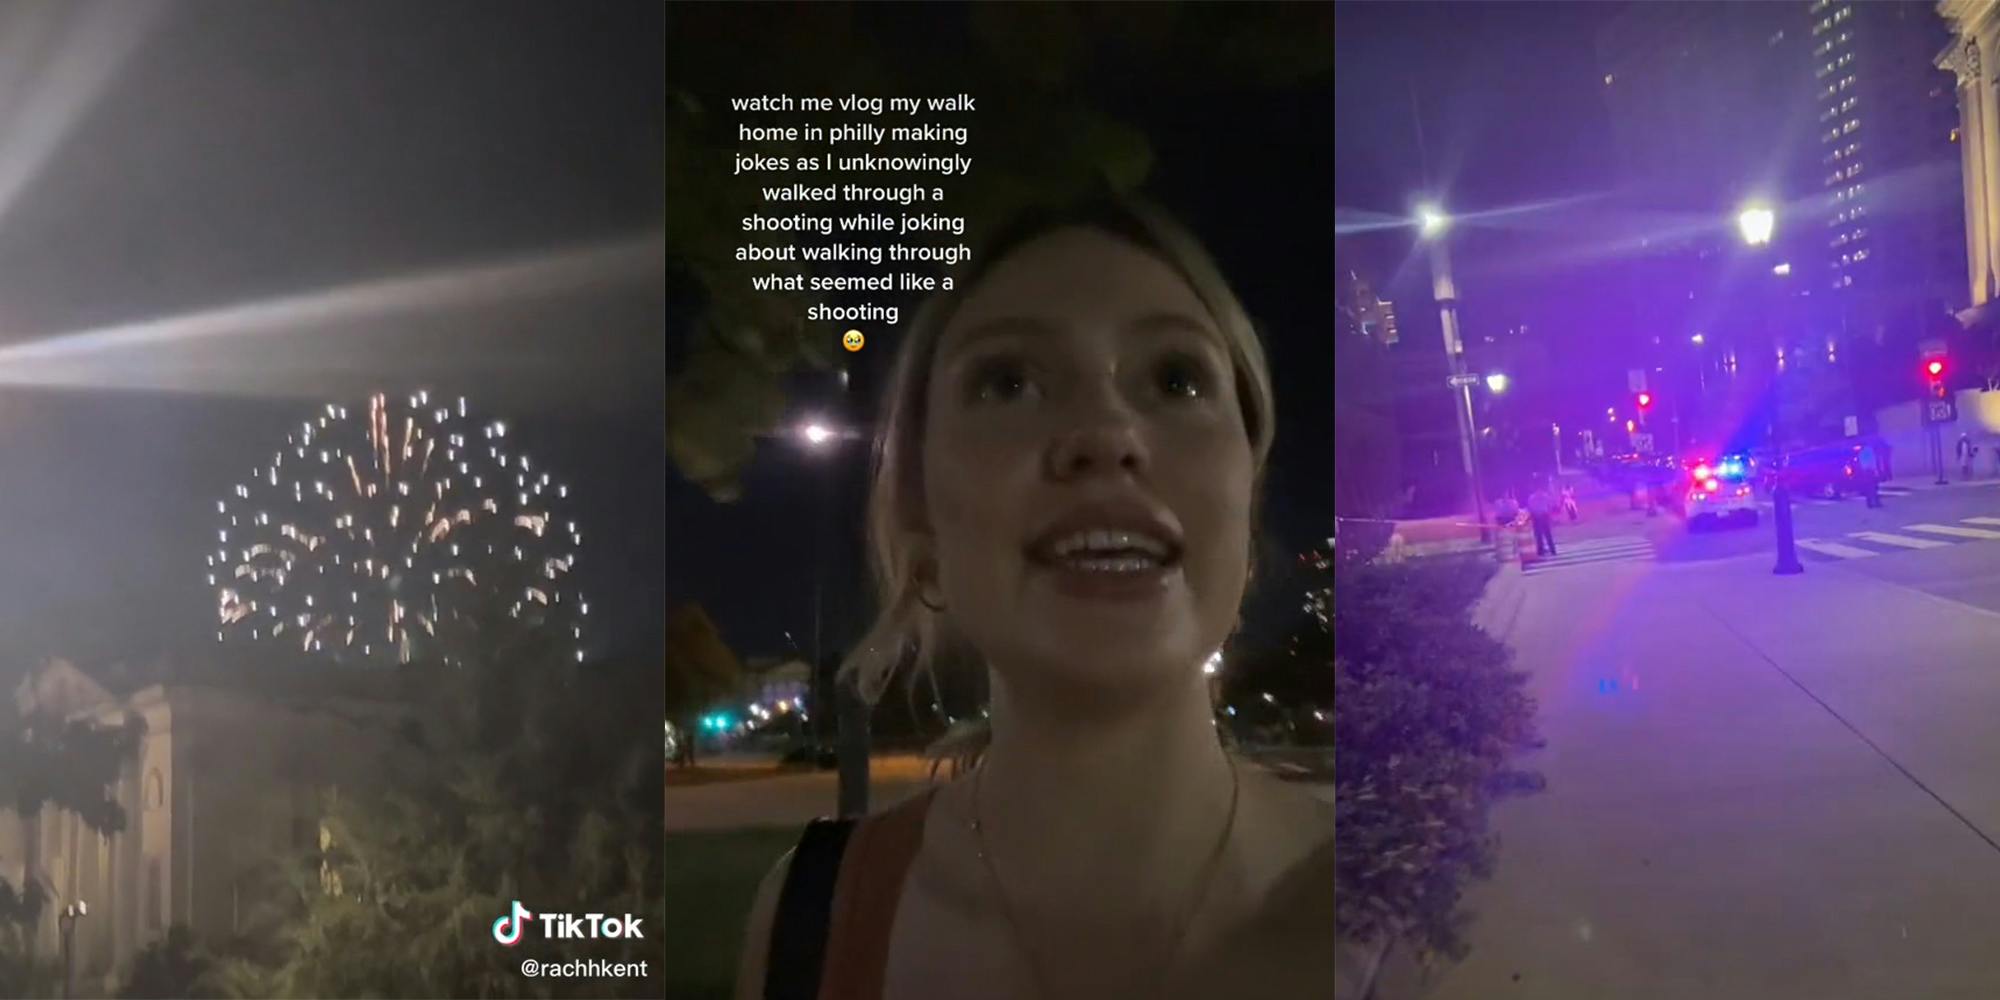 fireworks (l) young woman walking at night with caption "watch me vlog my walk home in philly making jokes as i unknowingly walked through a shooting while joking about walking through what seemed like a shooting" (c) police on street (r)